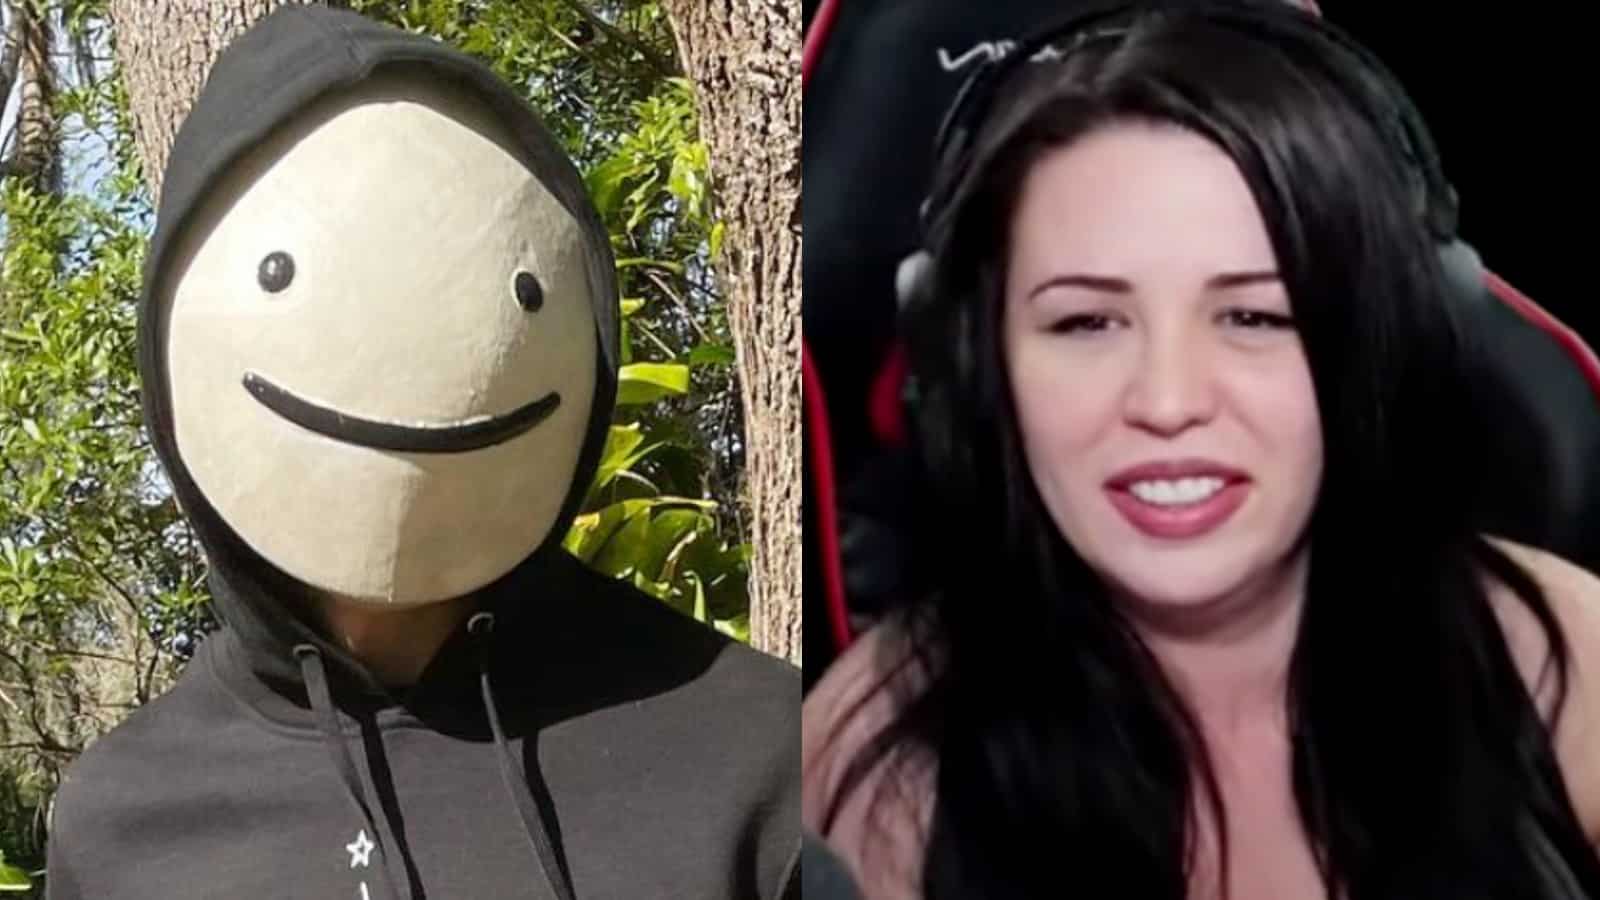 Image of Dream next to image of Kaceytron in a YouTube video